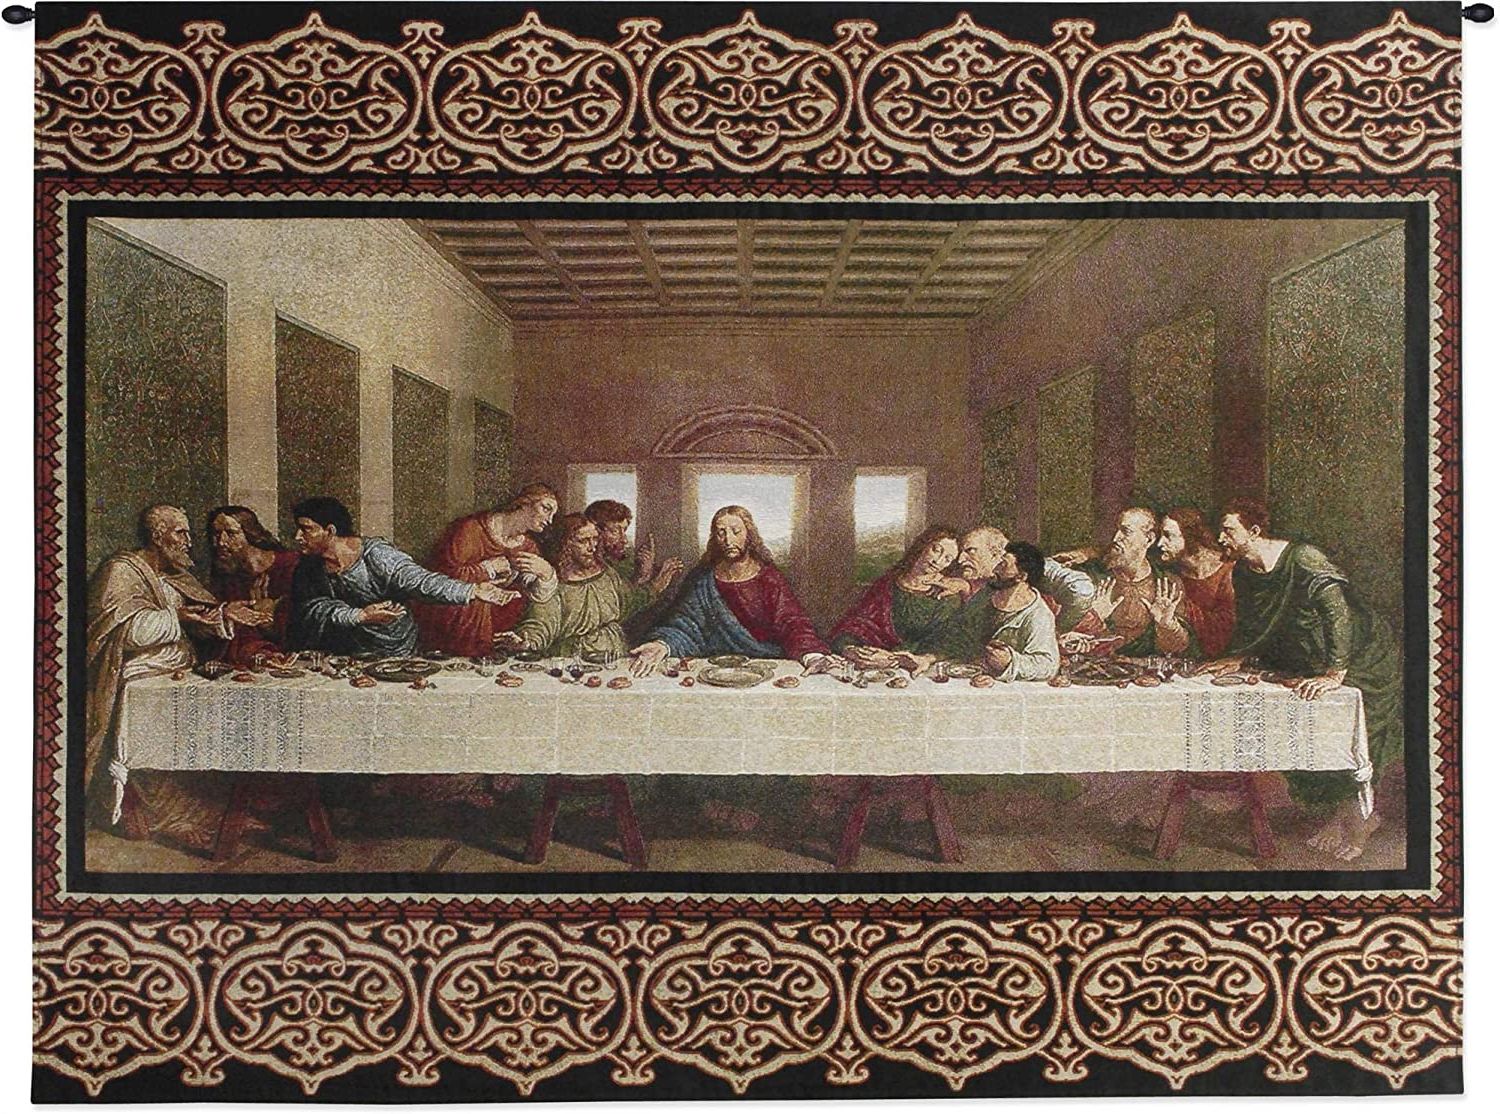 [%the Last Supperleonardo Da Vinci | Woven Tapestry Wall Art Hanging |  Religious Inspirational Jesus Last Supper | 100% Cotton Usa Size 53x40 In Fashionable Blended Fabric Leonardo Davinci The Last Supper Wall Hangings|blended Fabric Leonardo Davinci The Last Supper Wall Hangings In Most Current The Last Supperleonardo Da Vinci | Woven Tapestry Wall Art Hanging |  Religious Inspirational Jesus Last Supper | 100% Cotton Usa Size 53x40|well Liked Blended Fabric Leonardo Davinci The Last Supper Wall Hangings Within The Last Supperleonardo Da Vinci | Woven Tapestry Wall Art Hanging |  Religious Inspirational Jesus Last Supper | 100% Cotton Usa Size 53x40|most Popular The Last Supperleonardo Da Vinci | Woven Tapestry Wall Art Hanging |  Religious Inspirational Jesus Last Supper | 100% Cotton Usa Size 53x40 With Blended Fabric Leonardo Davinci The Last Supper Wall Hangings%] (Photo 6 of 20)